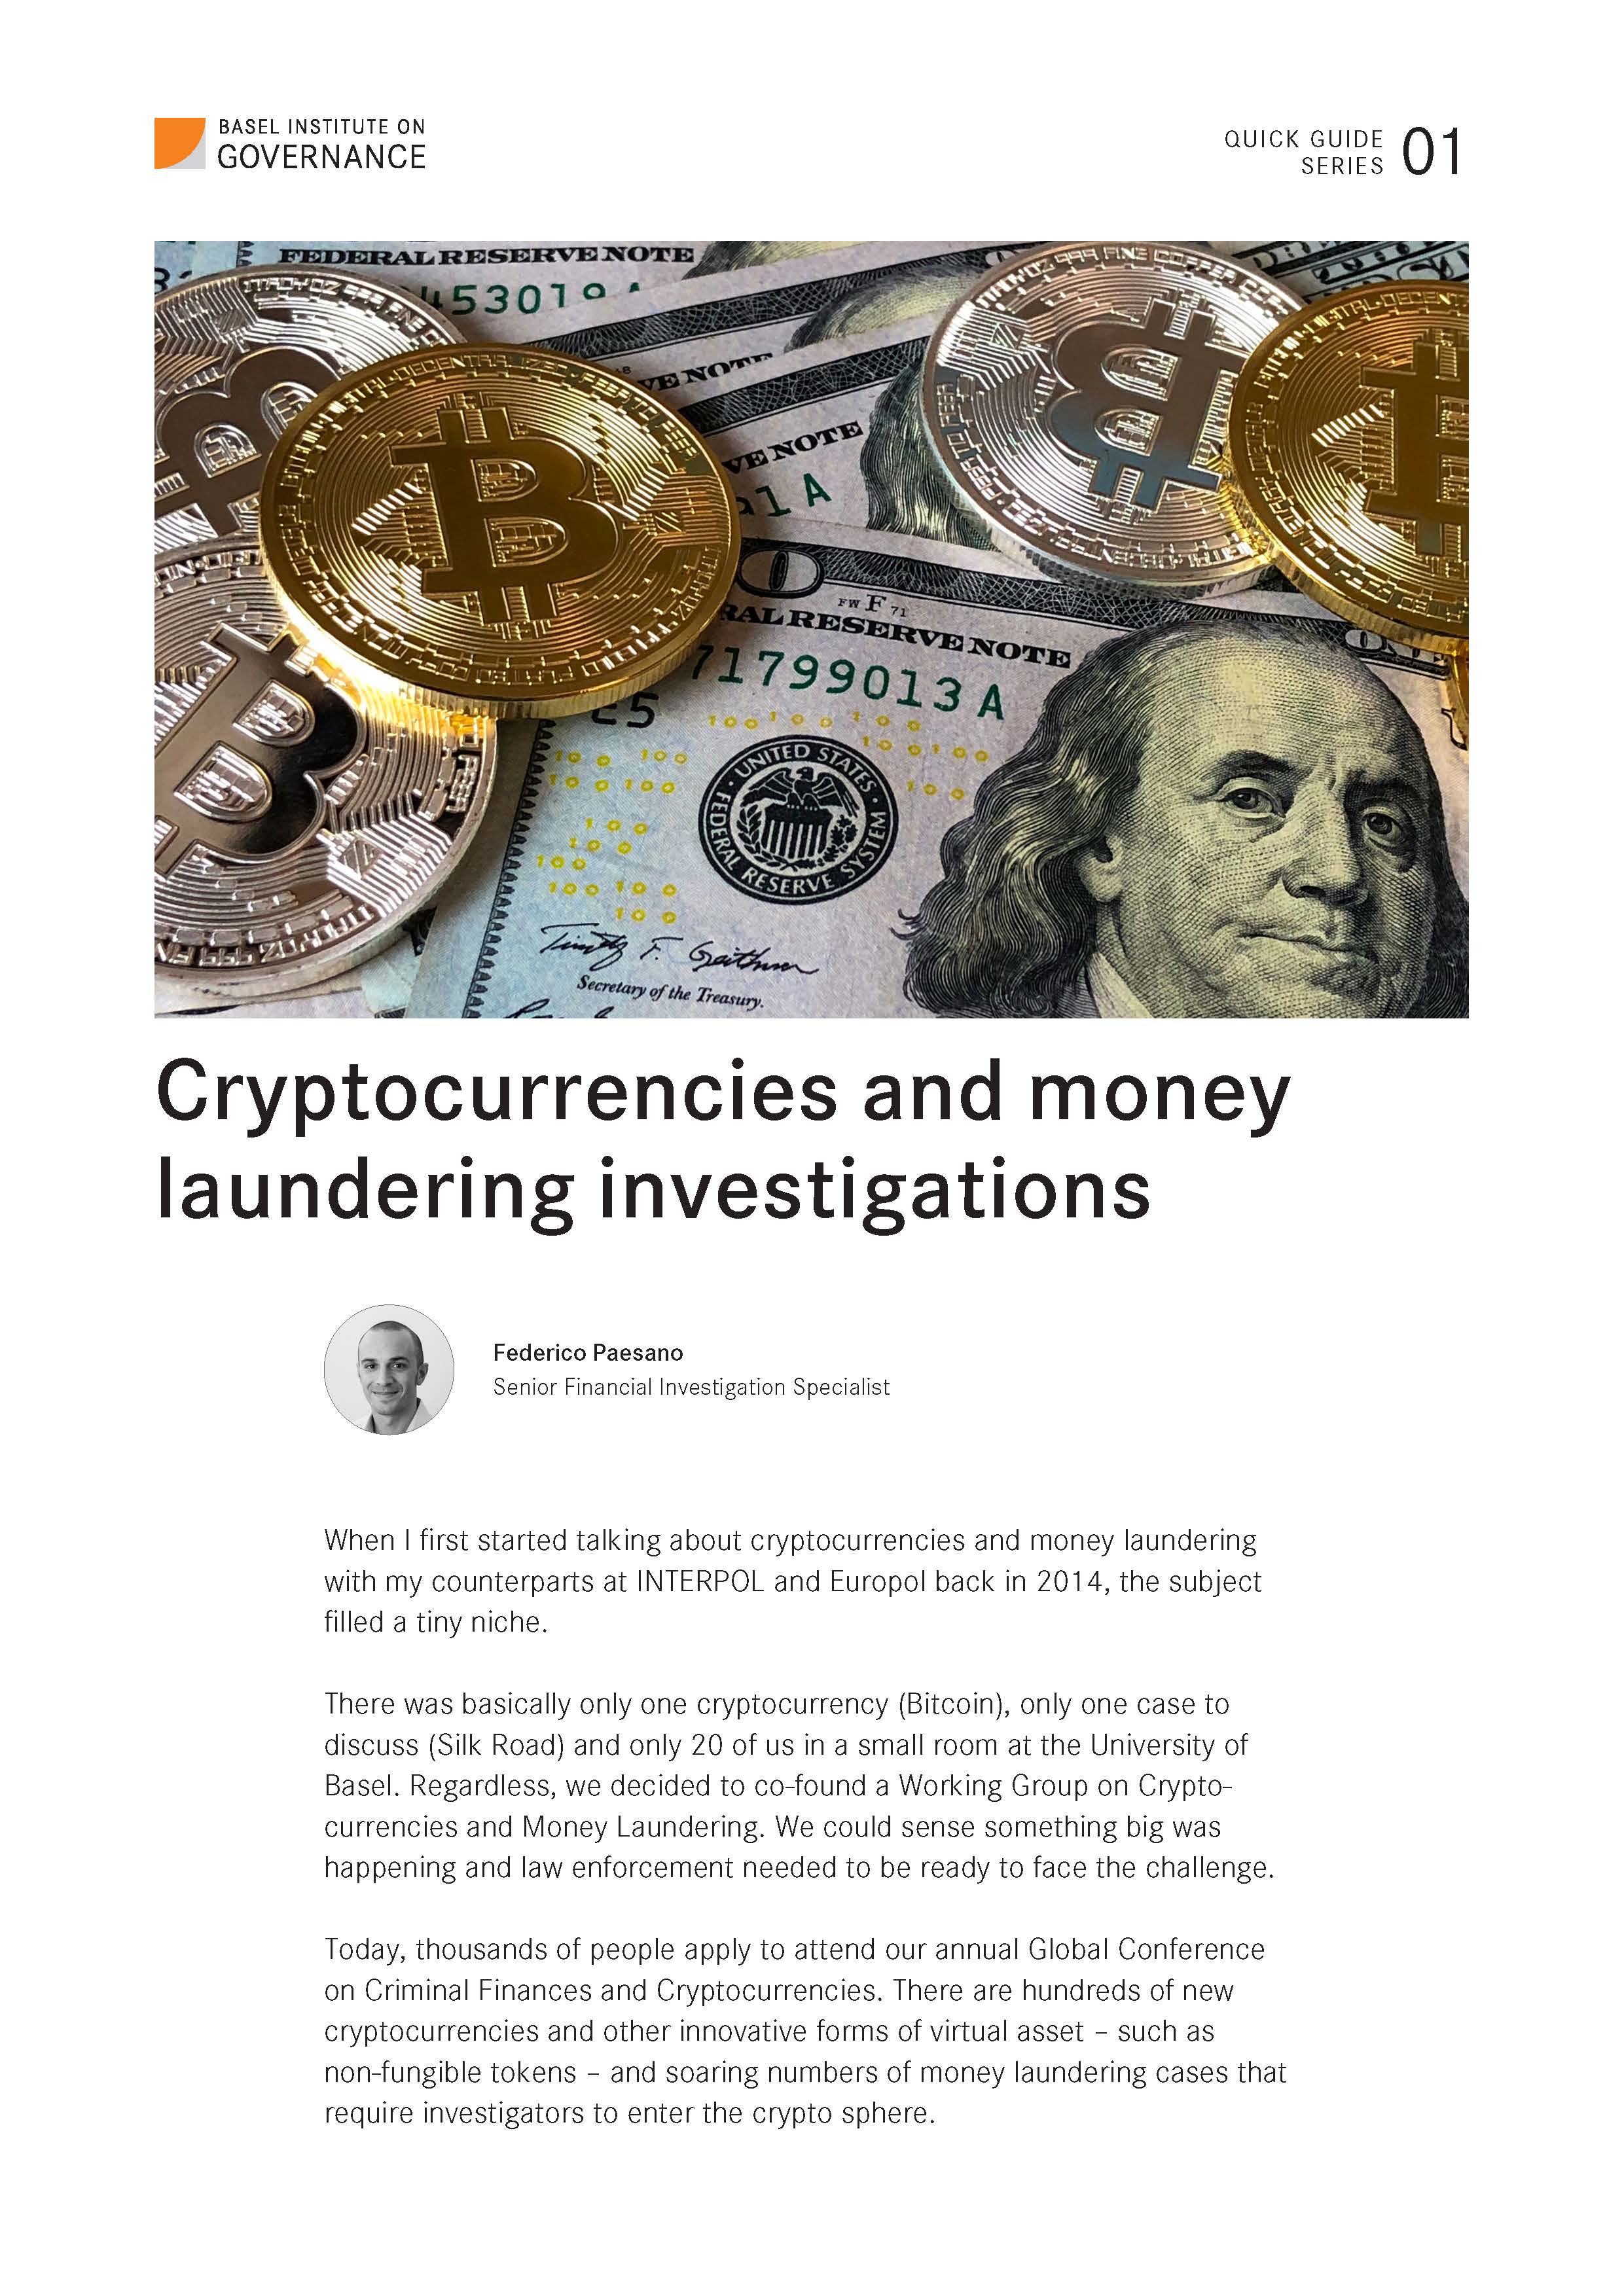 Quick guide to cryptocurrencies and money laundering investigations - updated August 2021